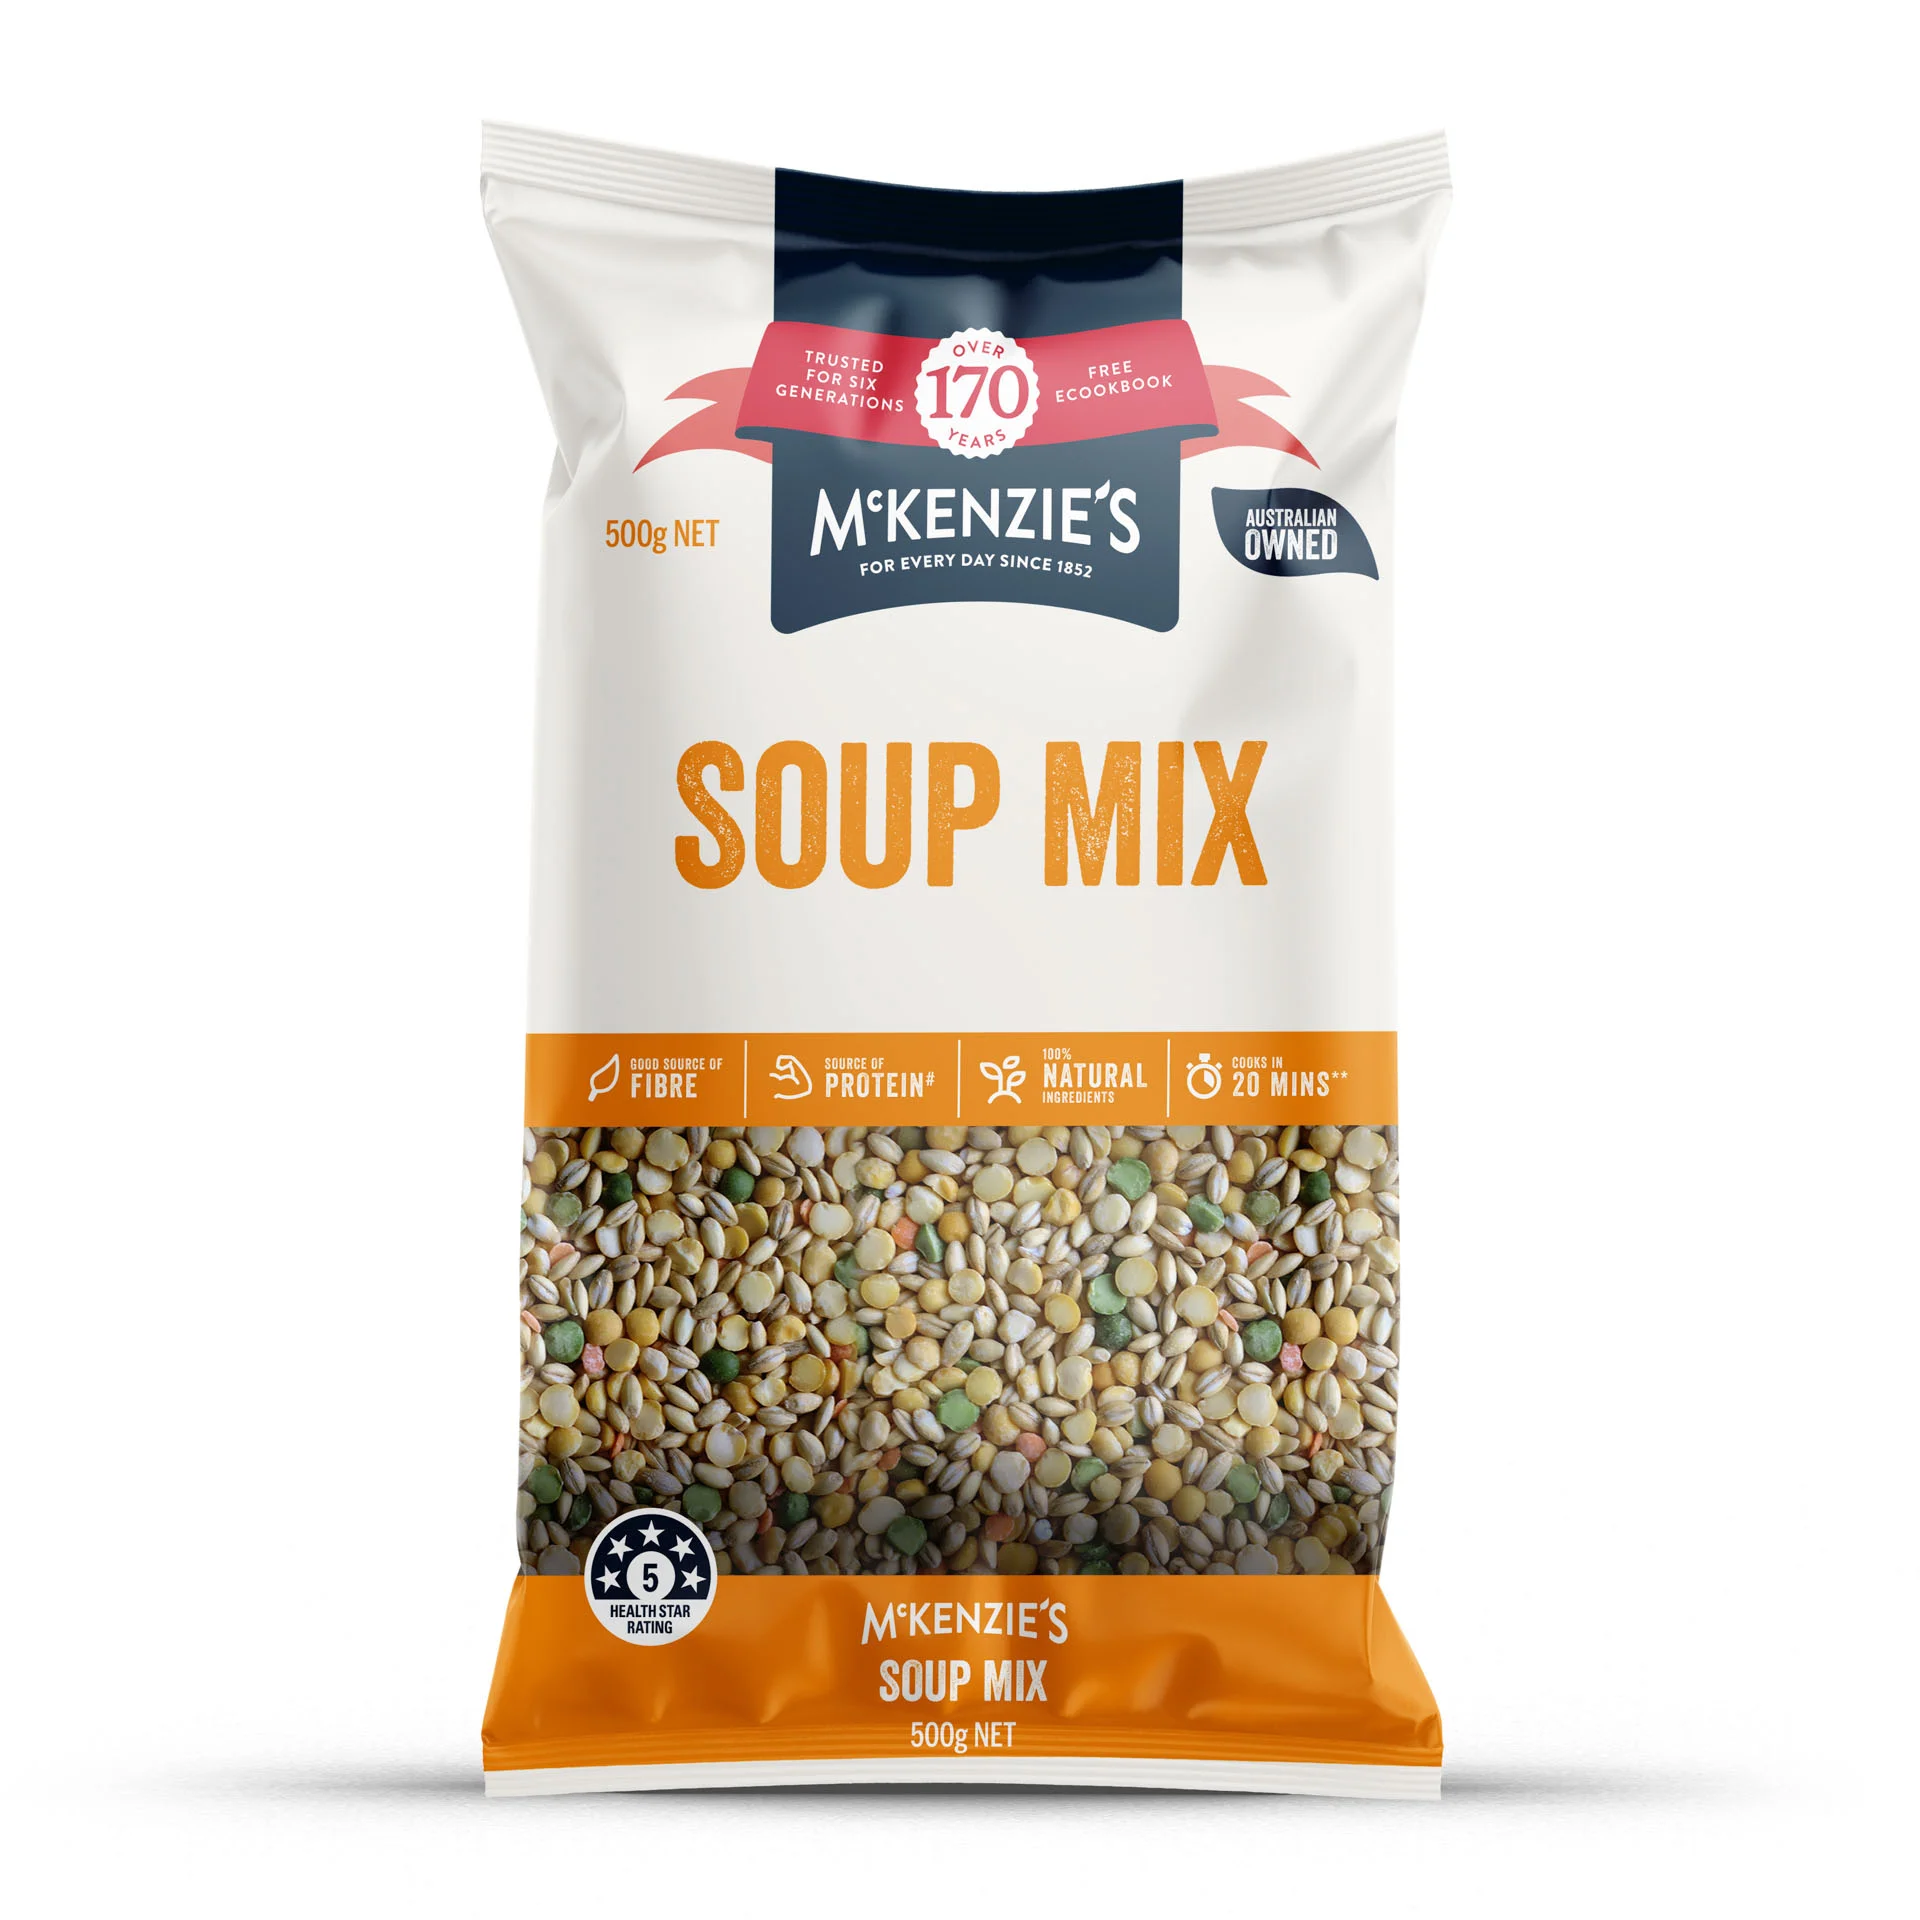 Product photo of McKenzie's Soup Mix